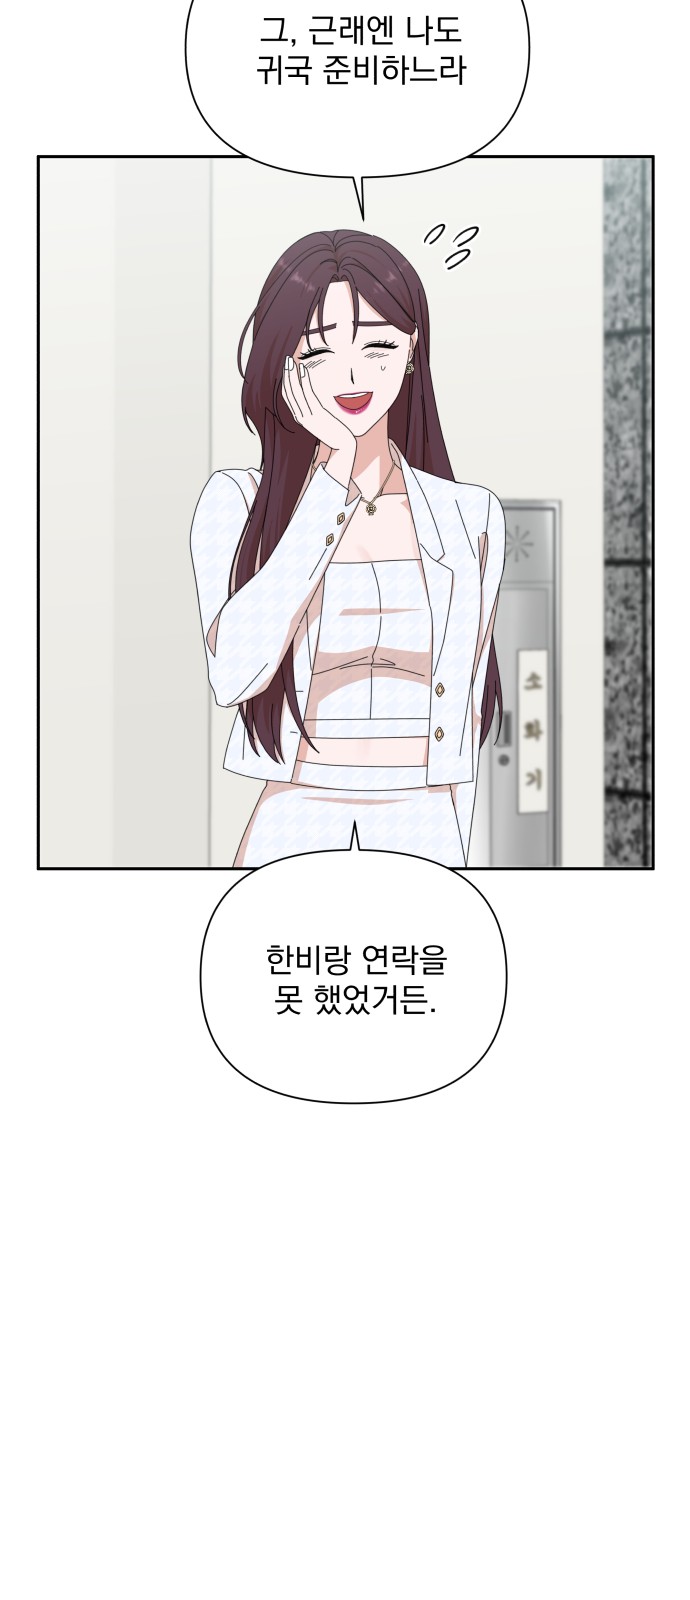 The Man With Pretty Lips - Chapter 26 - Page 7